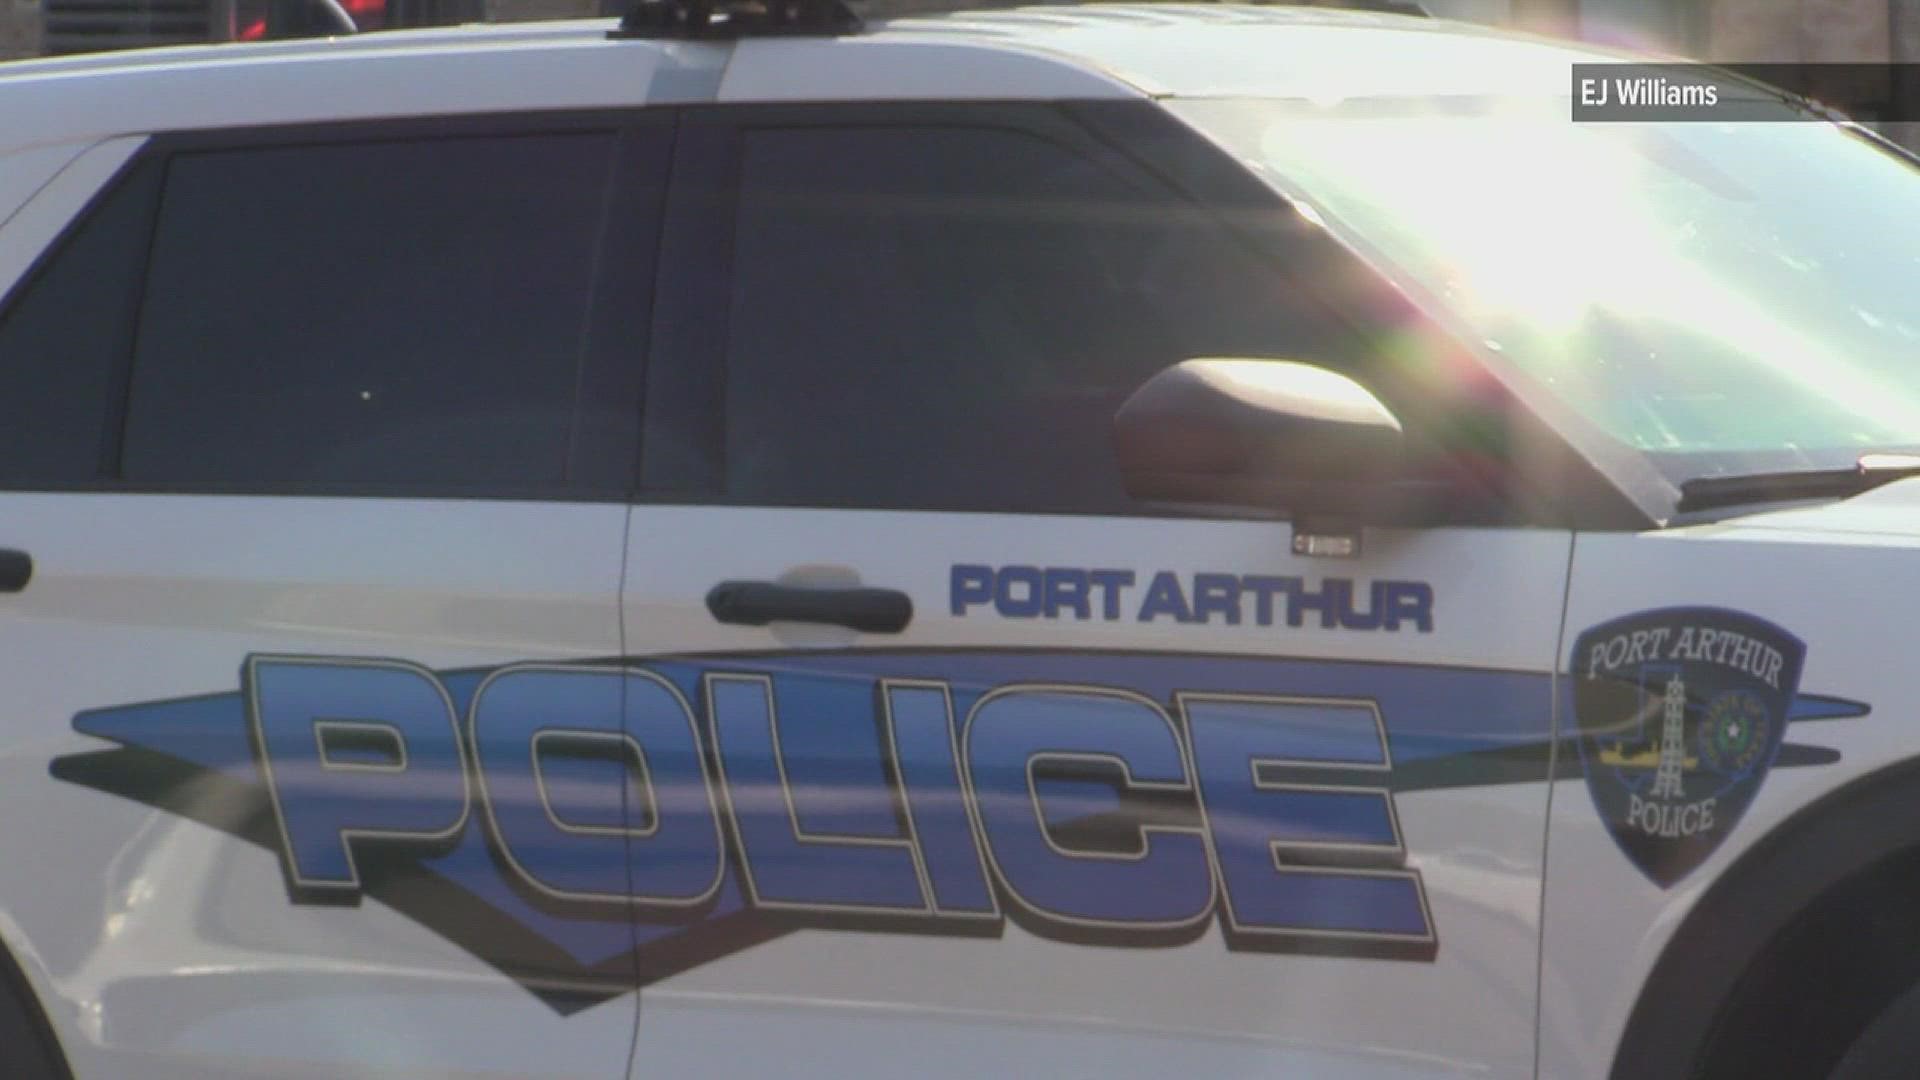 Port Arthur Police have a 15-year-old suspect in custody after a Saturday shooting at an area apartment complex claimed the life of a 26-year-old man.